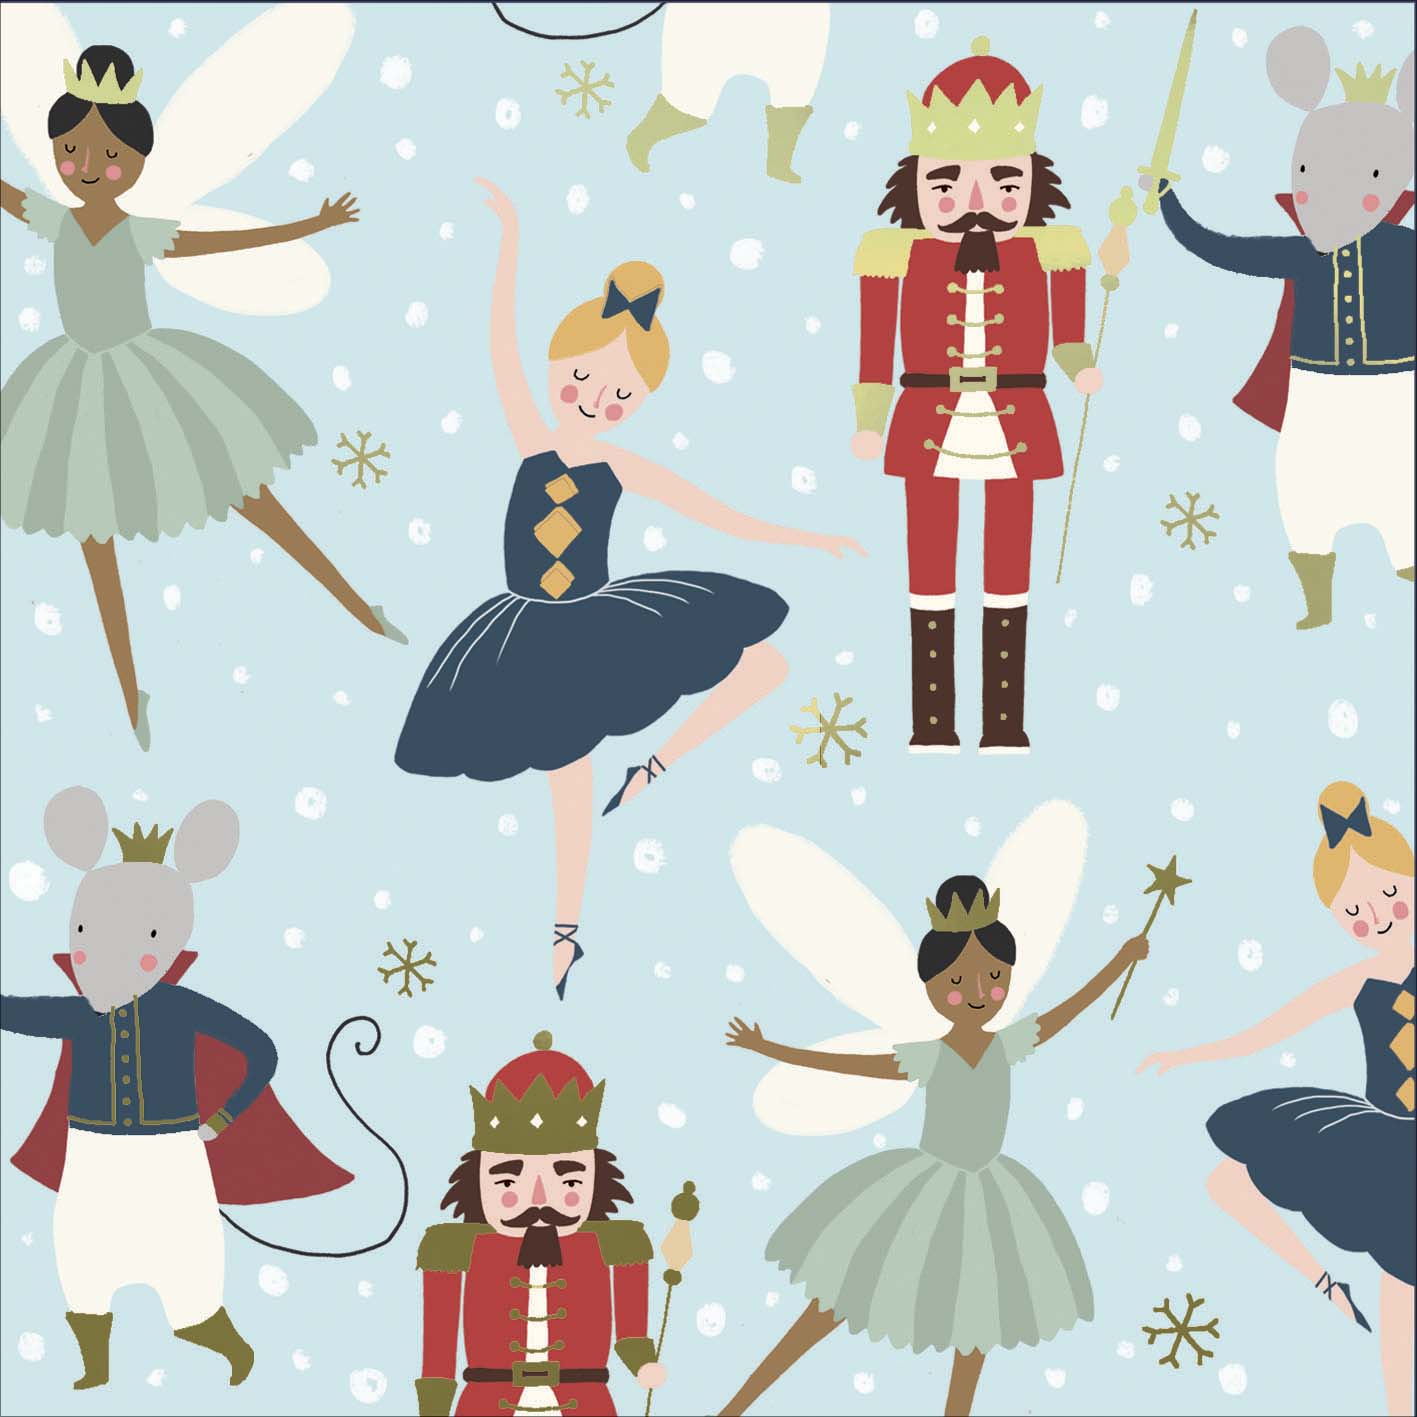 Box of 10 The Nutcracker RSPCA Charity Christmas Cards